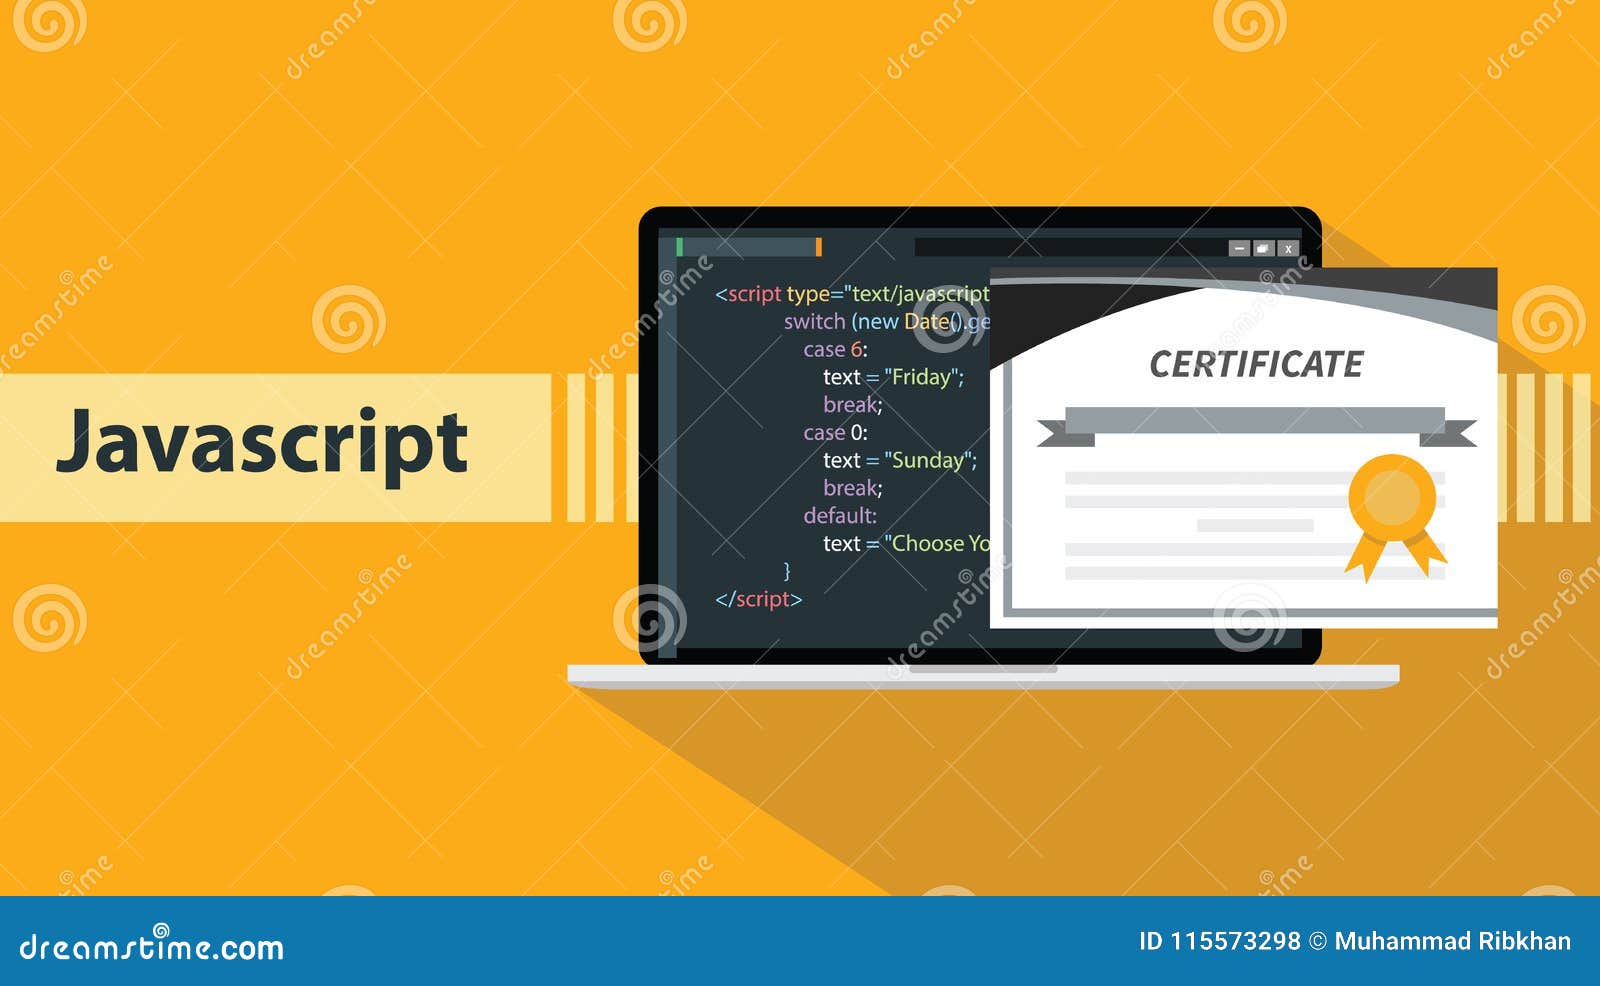 20 Free Online Certificate Courses For Javascript